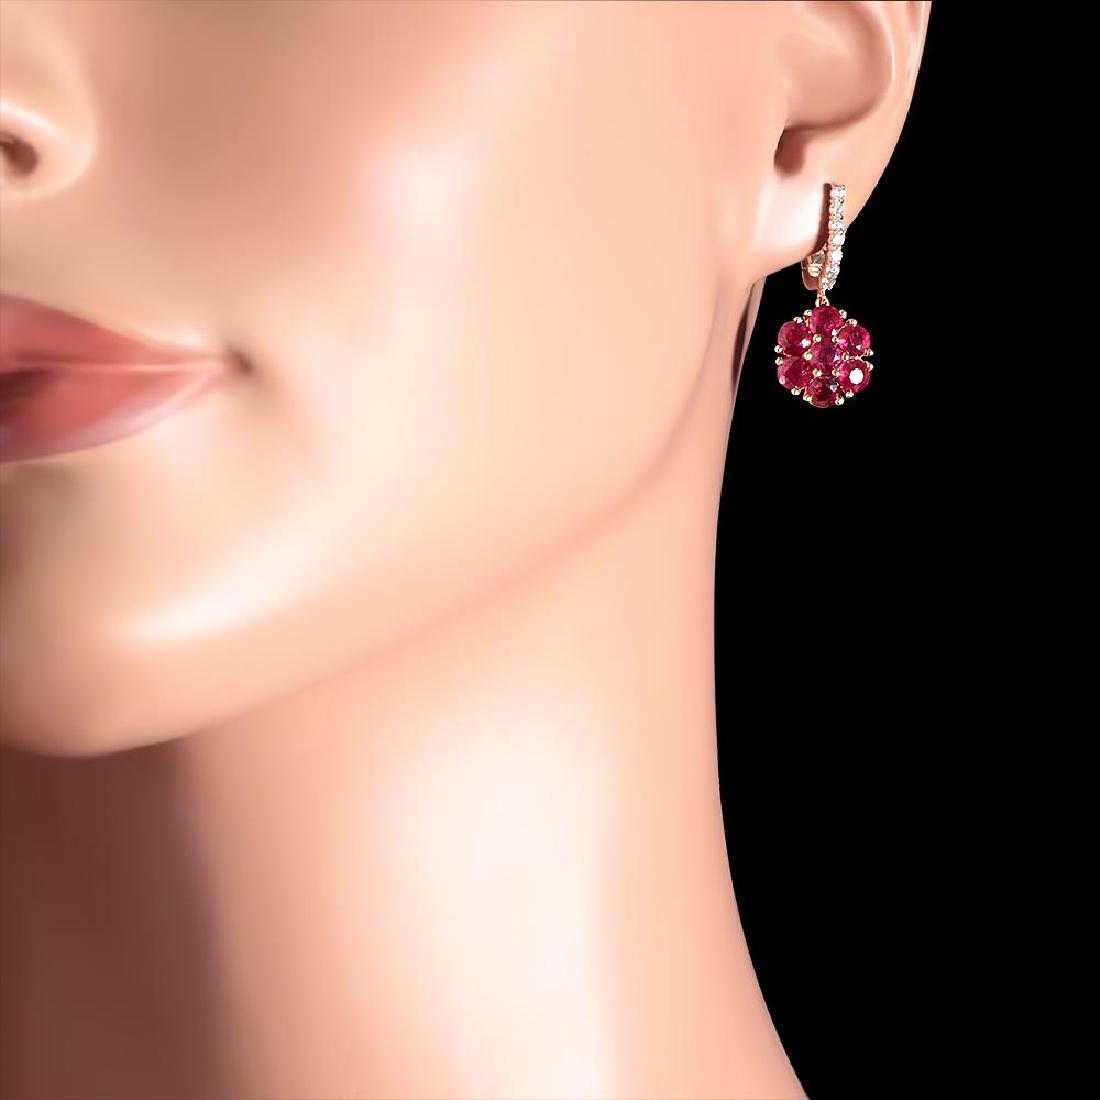 14K Yellow Gold 5.22ct Ruby and 0.42ct Diamond Earrings